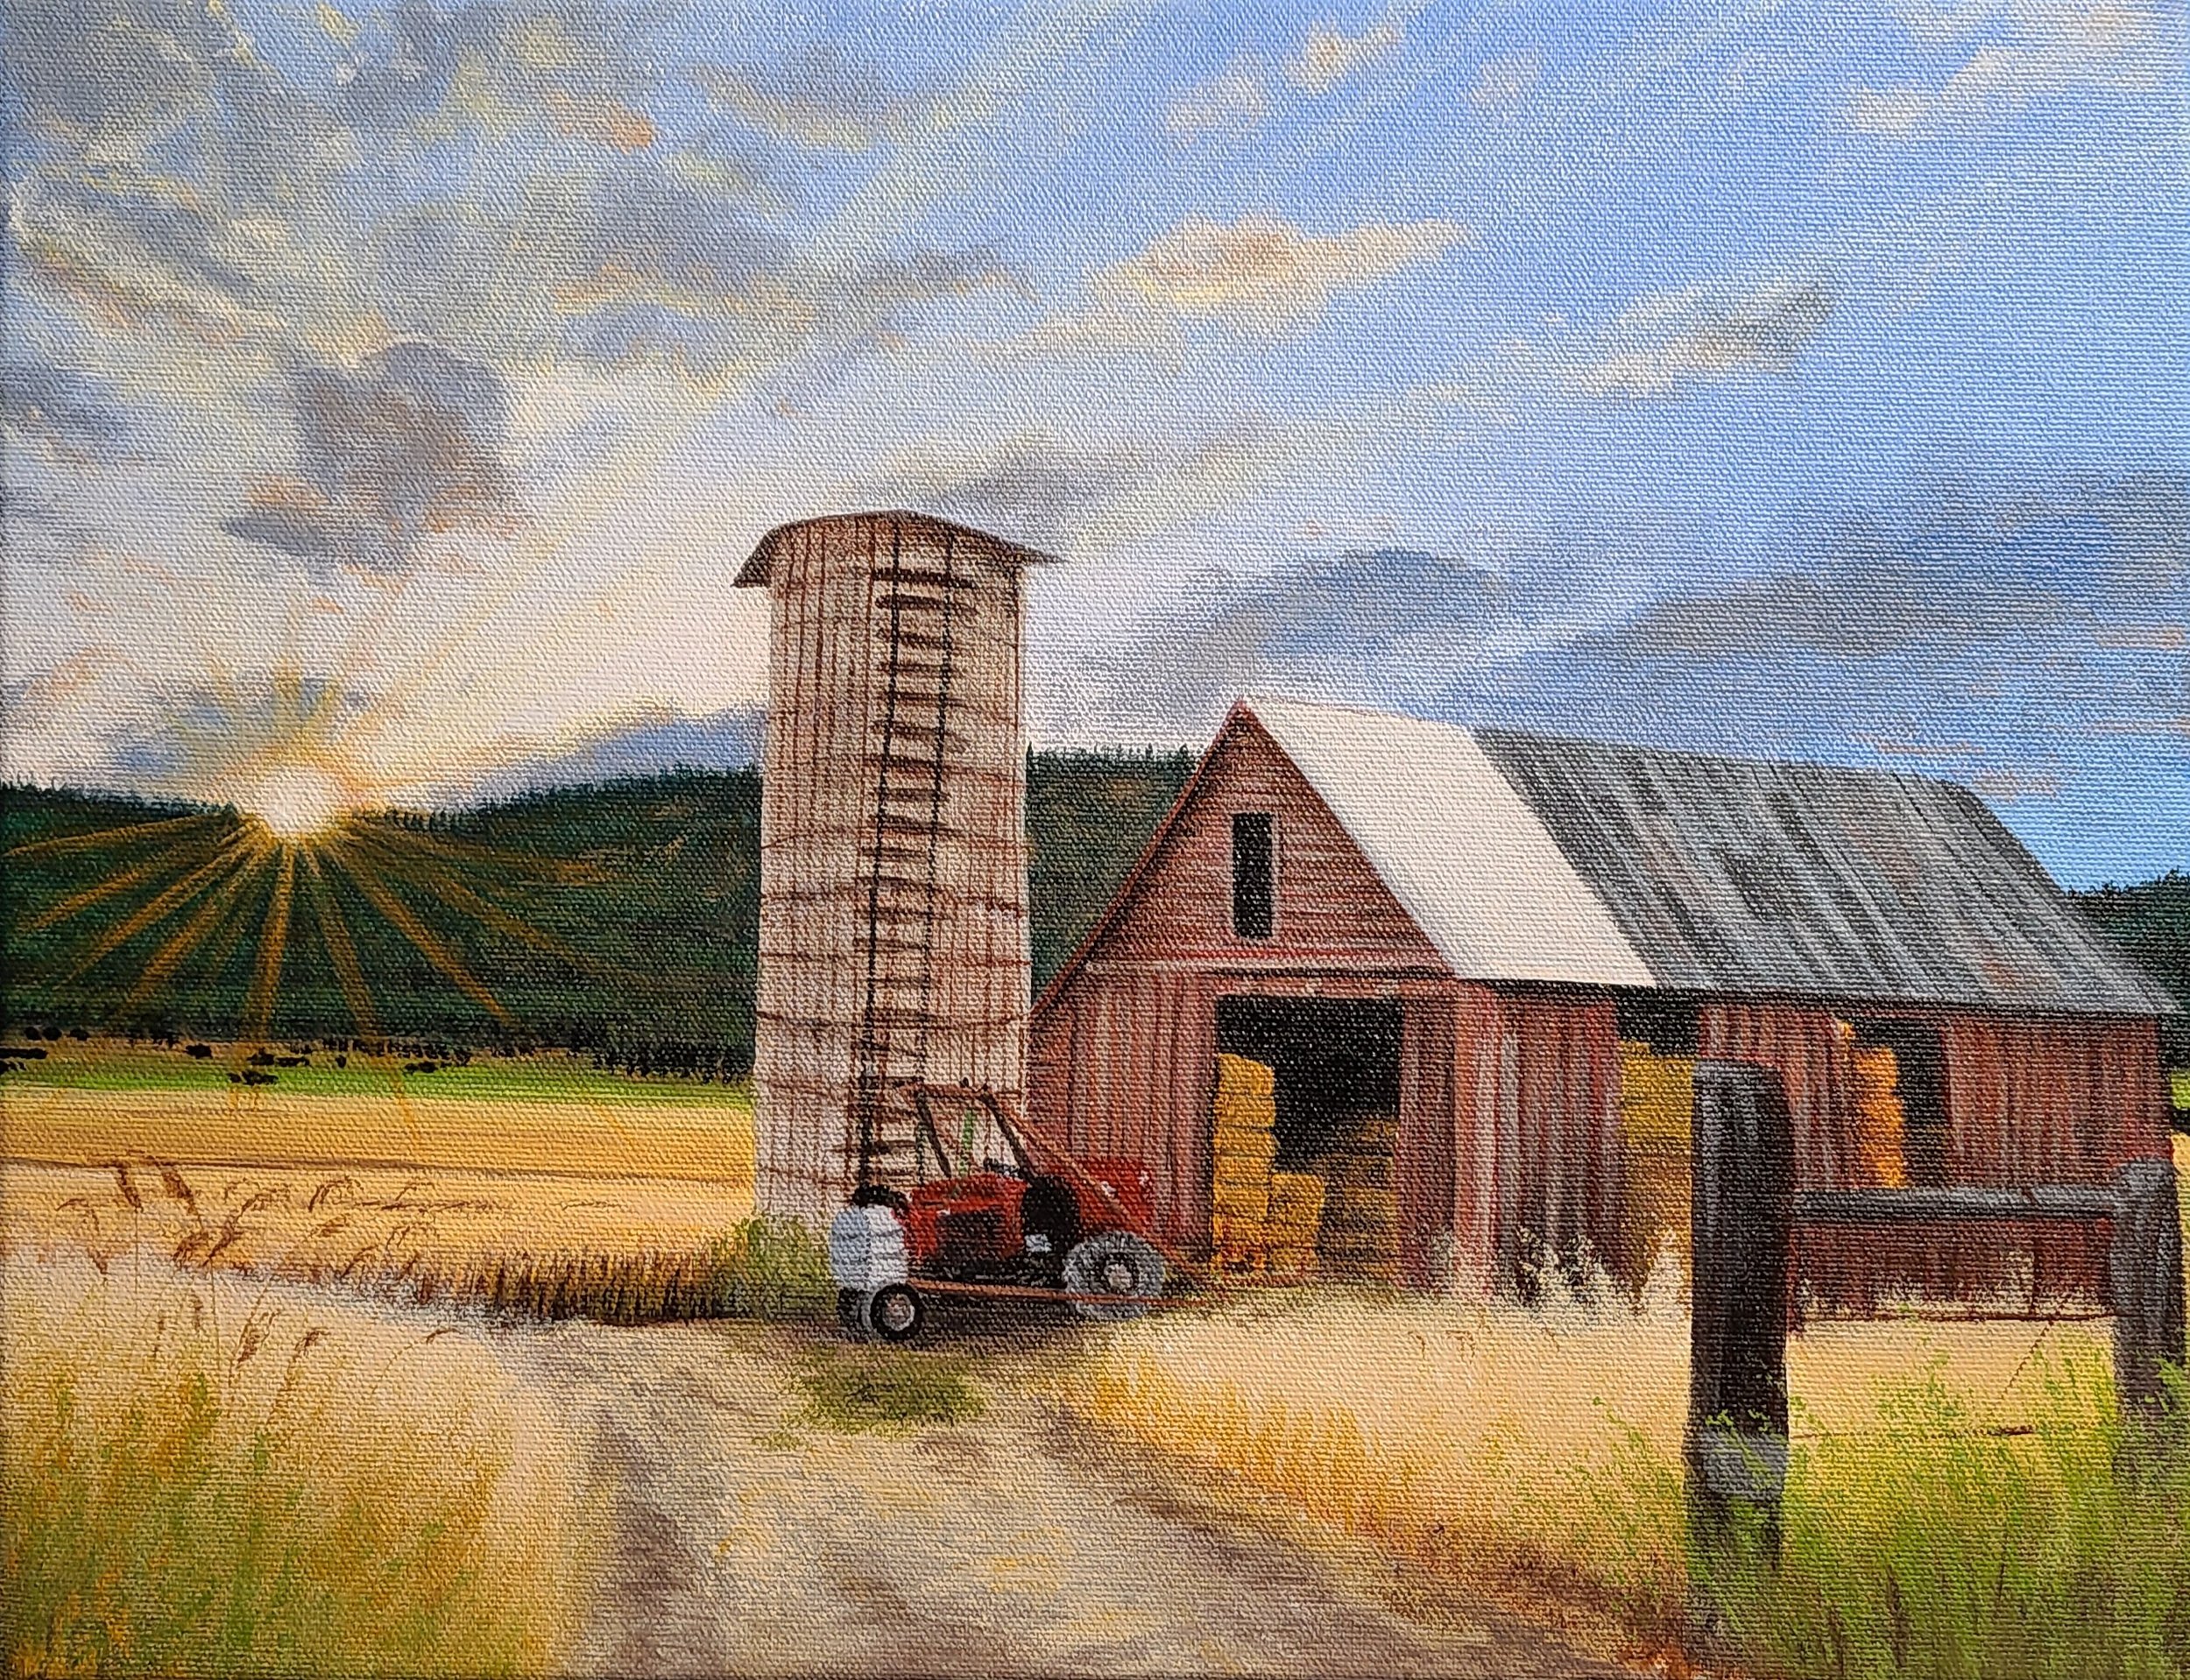 Sunrise Farm with Barn and Tractor - My painting (Part 2).jpg